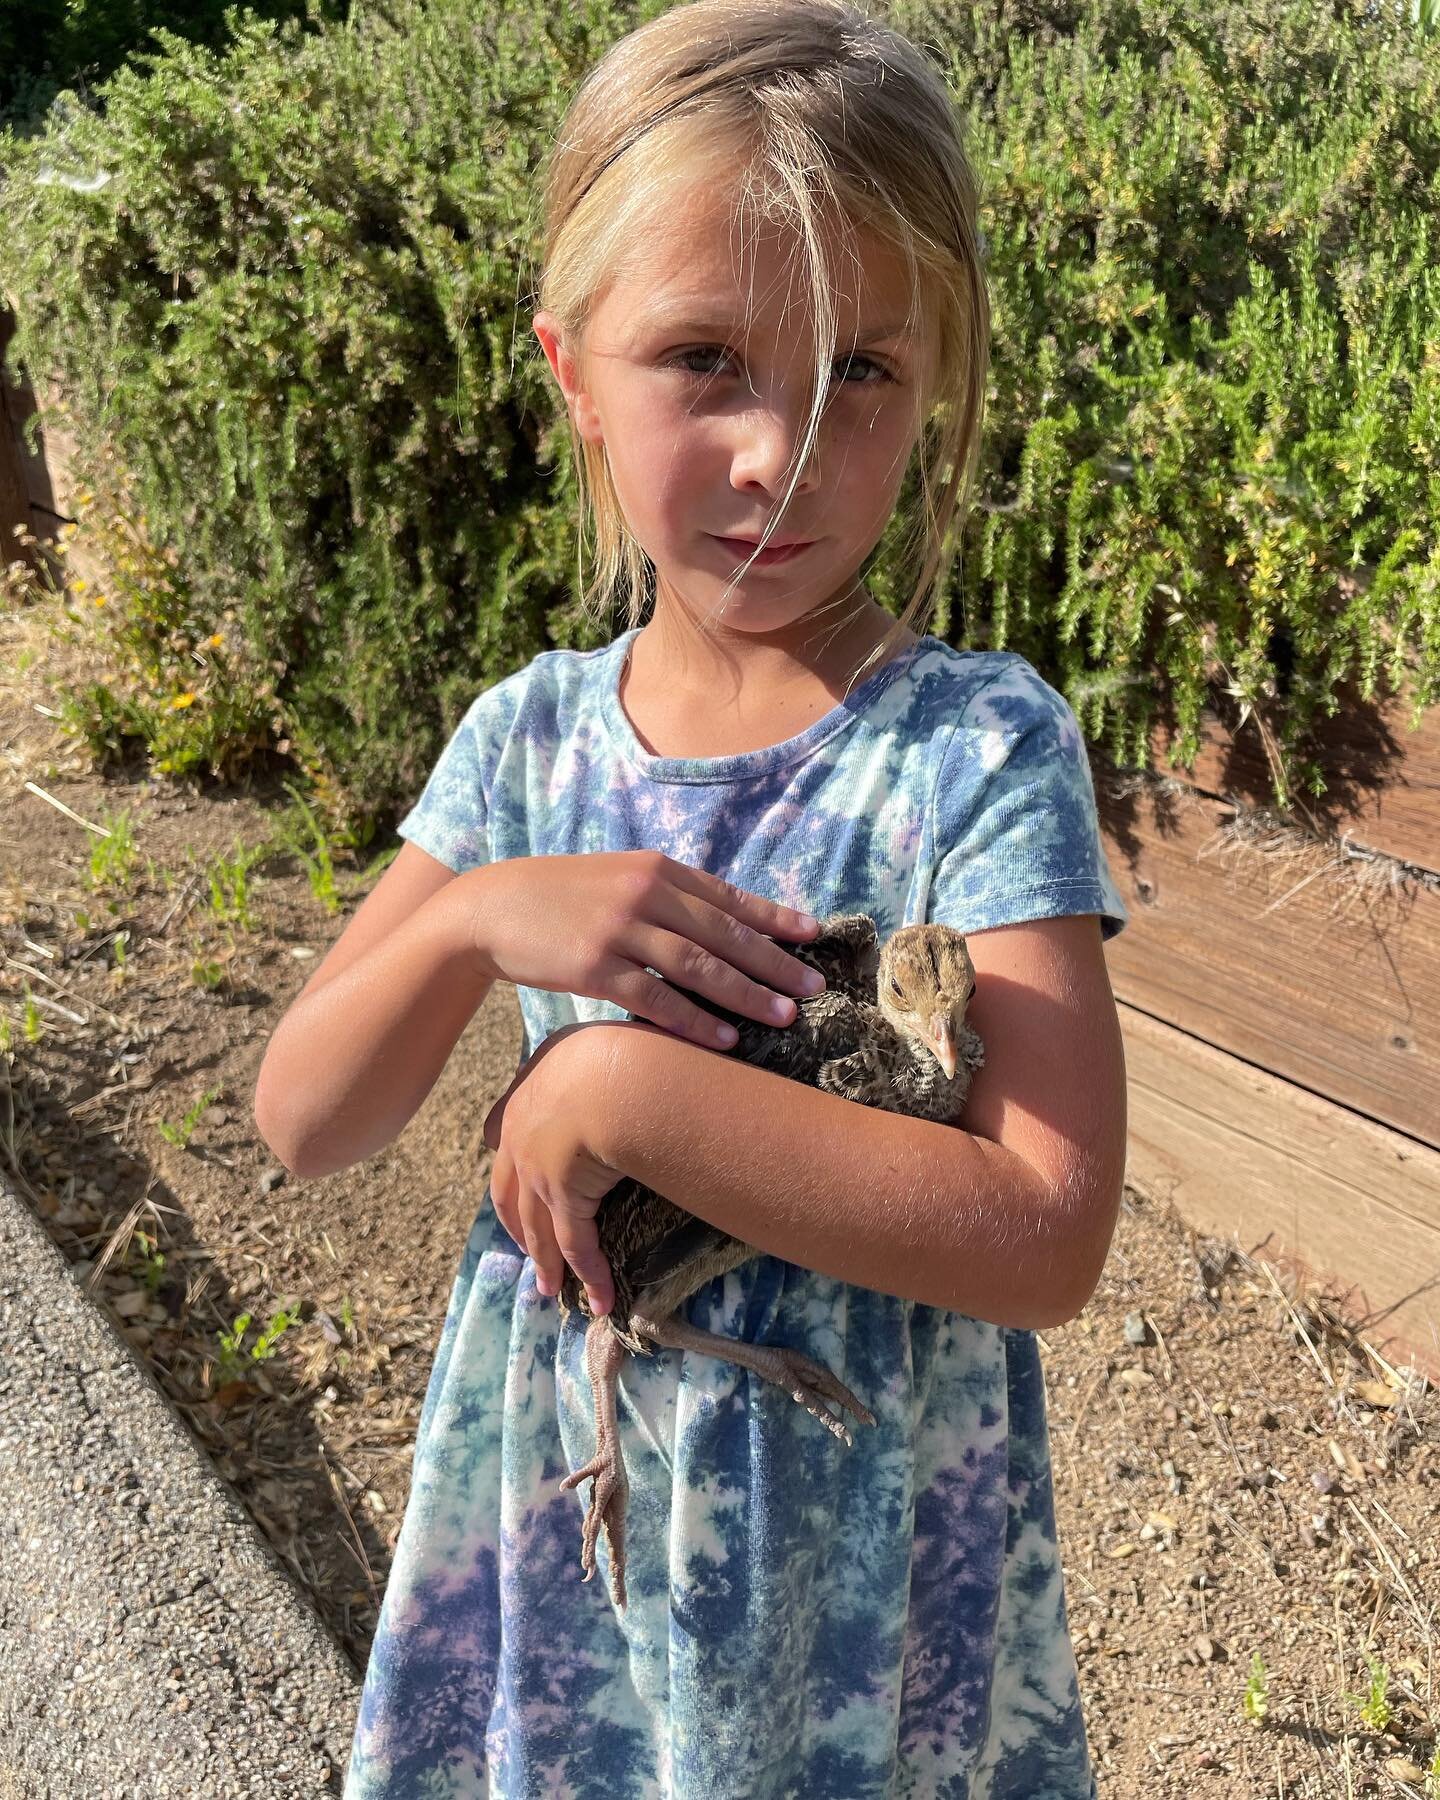 Royal Nonesuch Farm - now home to Ramona&rsquo;s baby bird orphanage. Today she added a baby wild turkey to her flock that includes the blue jays she found last week.